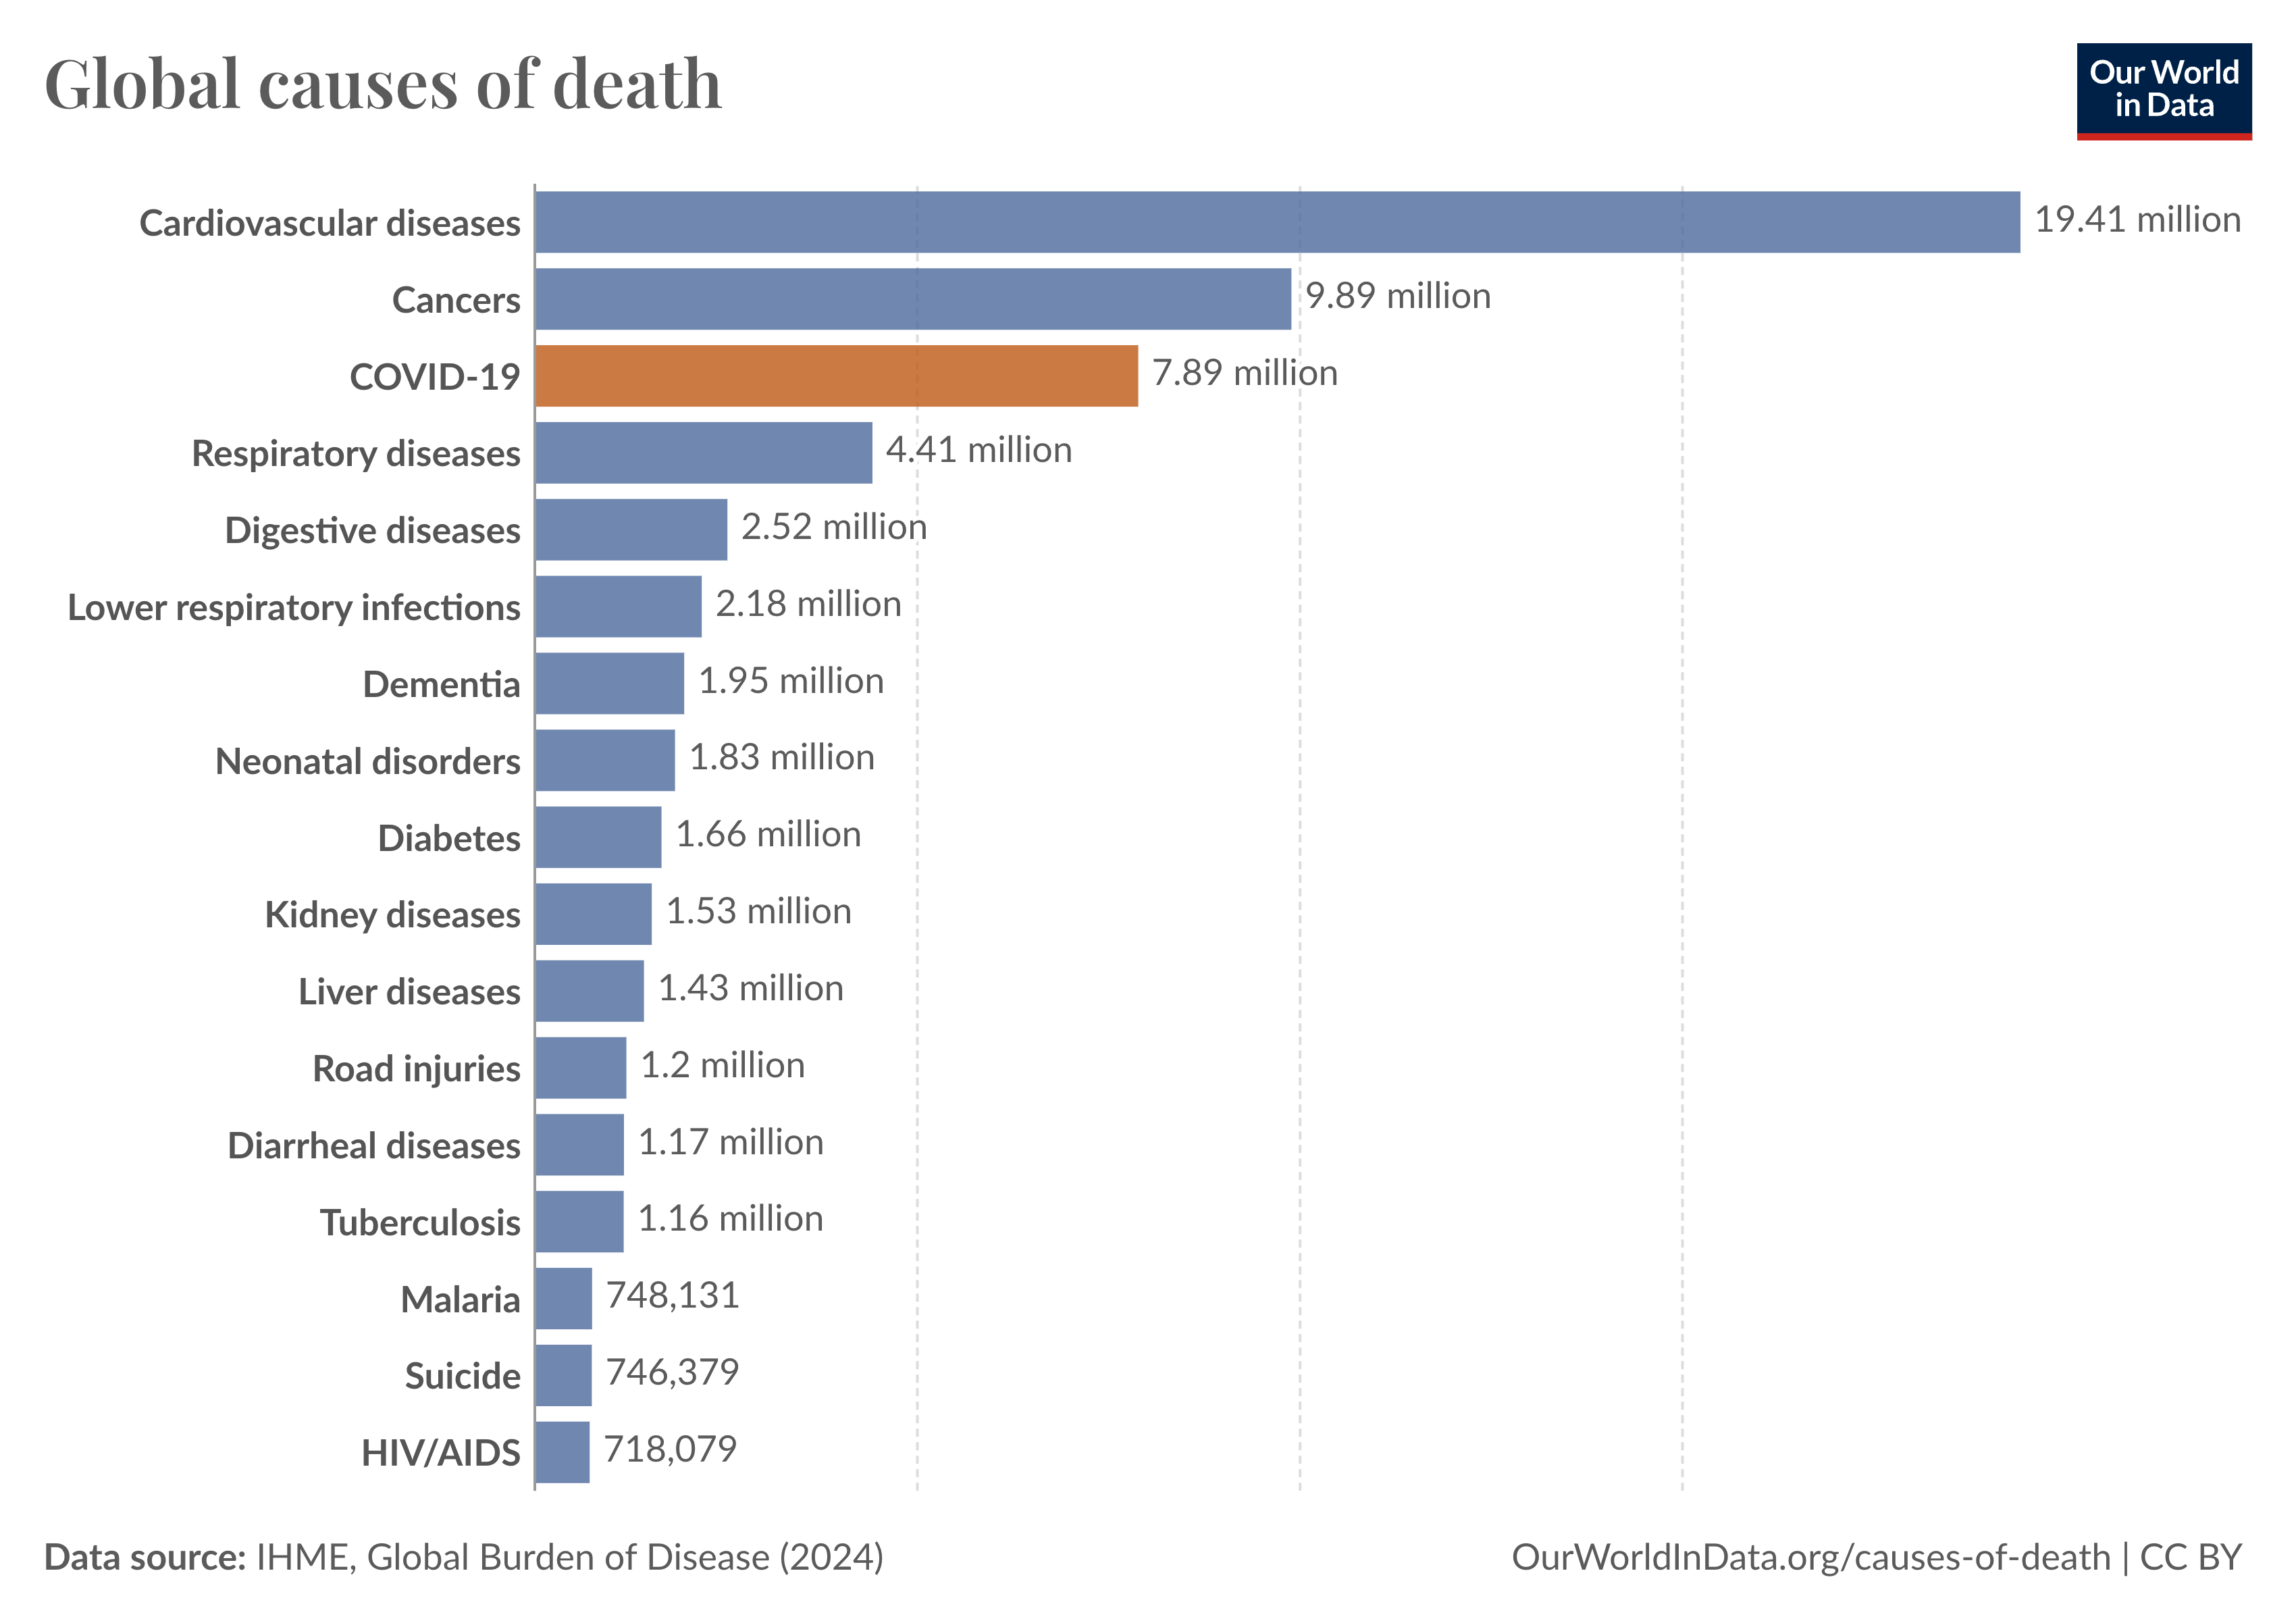 
This image is a horizontal bar chart titled "Global causes of death," sourced from IHME, Global Burden of Disease (2024). It lists various causes of death worldwide, with each cause represented by a horizontal bar indicating the number of deaths in millions. The causes are ranked from highest to lowest as follows:

Cardiovascular diseases: 19.41 million
Cancers: 9.89 million
COVID-19: 7.89 million (highlighted in orange)
Respiratory diseases: 4.41 million
Digestive diseases: 2.52 million
Lower respiratory infections: 2.18 million
Dementia: 1.95 million
Neonatal disorders: 1.83 million
Diabetes: 1.66 million
Kidney diseases: 1.53 million
Liver diseases: 1.43 million
Road injuries: 1.2 million
Diarrheal diseases: 1.17 million
Tuberculosis: 1.16 million
Malaria: 748,131
Suicide: 746,379
HIV/AIDS: 718,079
The chart uses a color code where most bars are in blue, except for COVID-19, which is in orange. The source and licensing information is at the bottom right corner of the image.